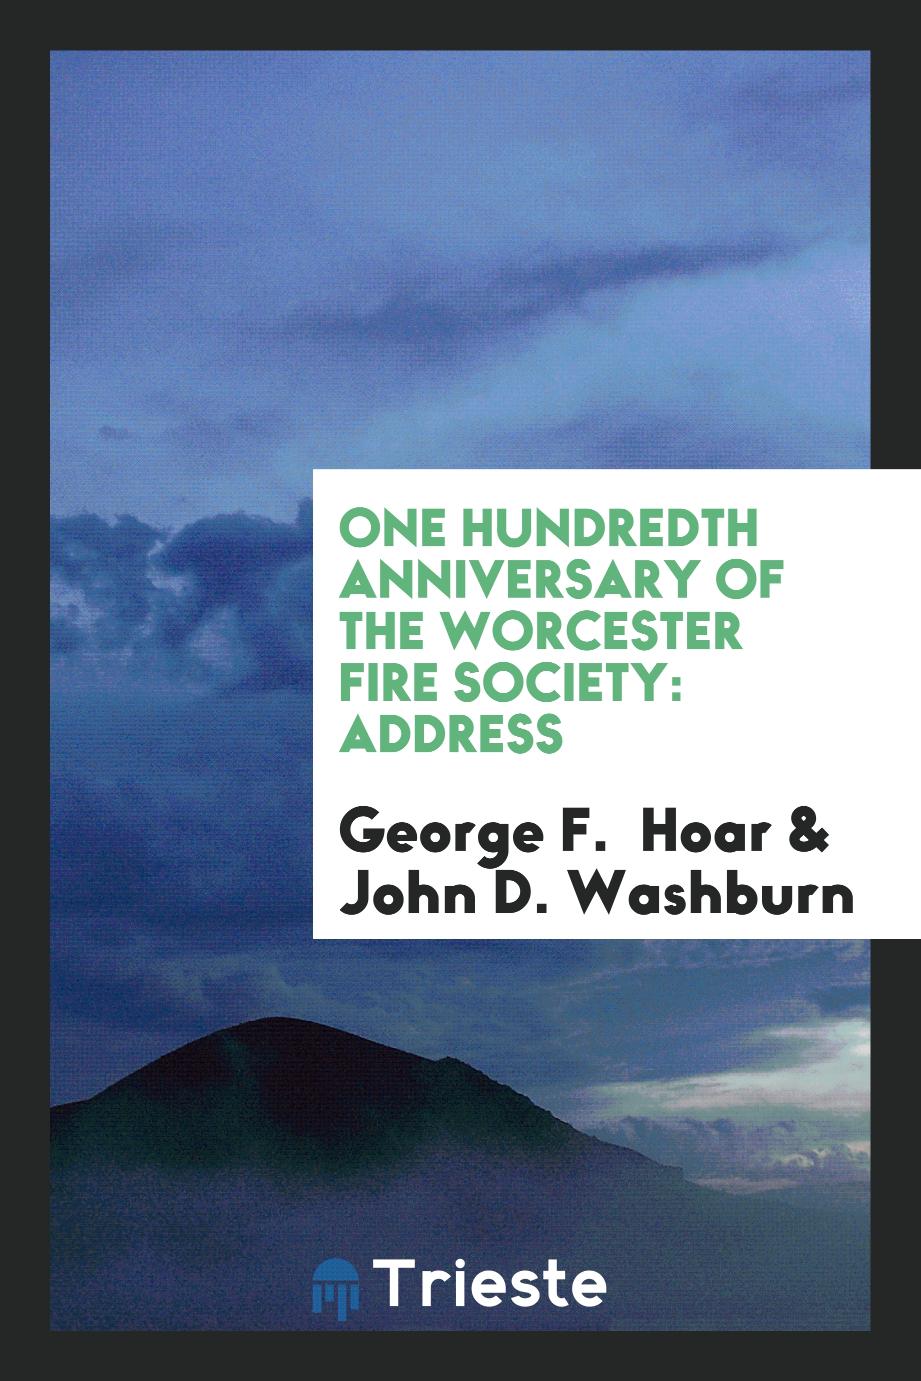 One Hundredth Anniversary of the Worcester Fire Society: Address